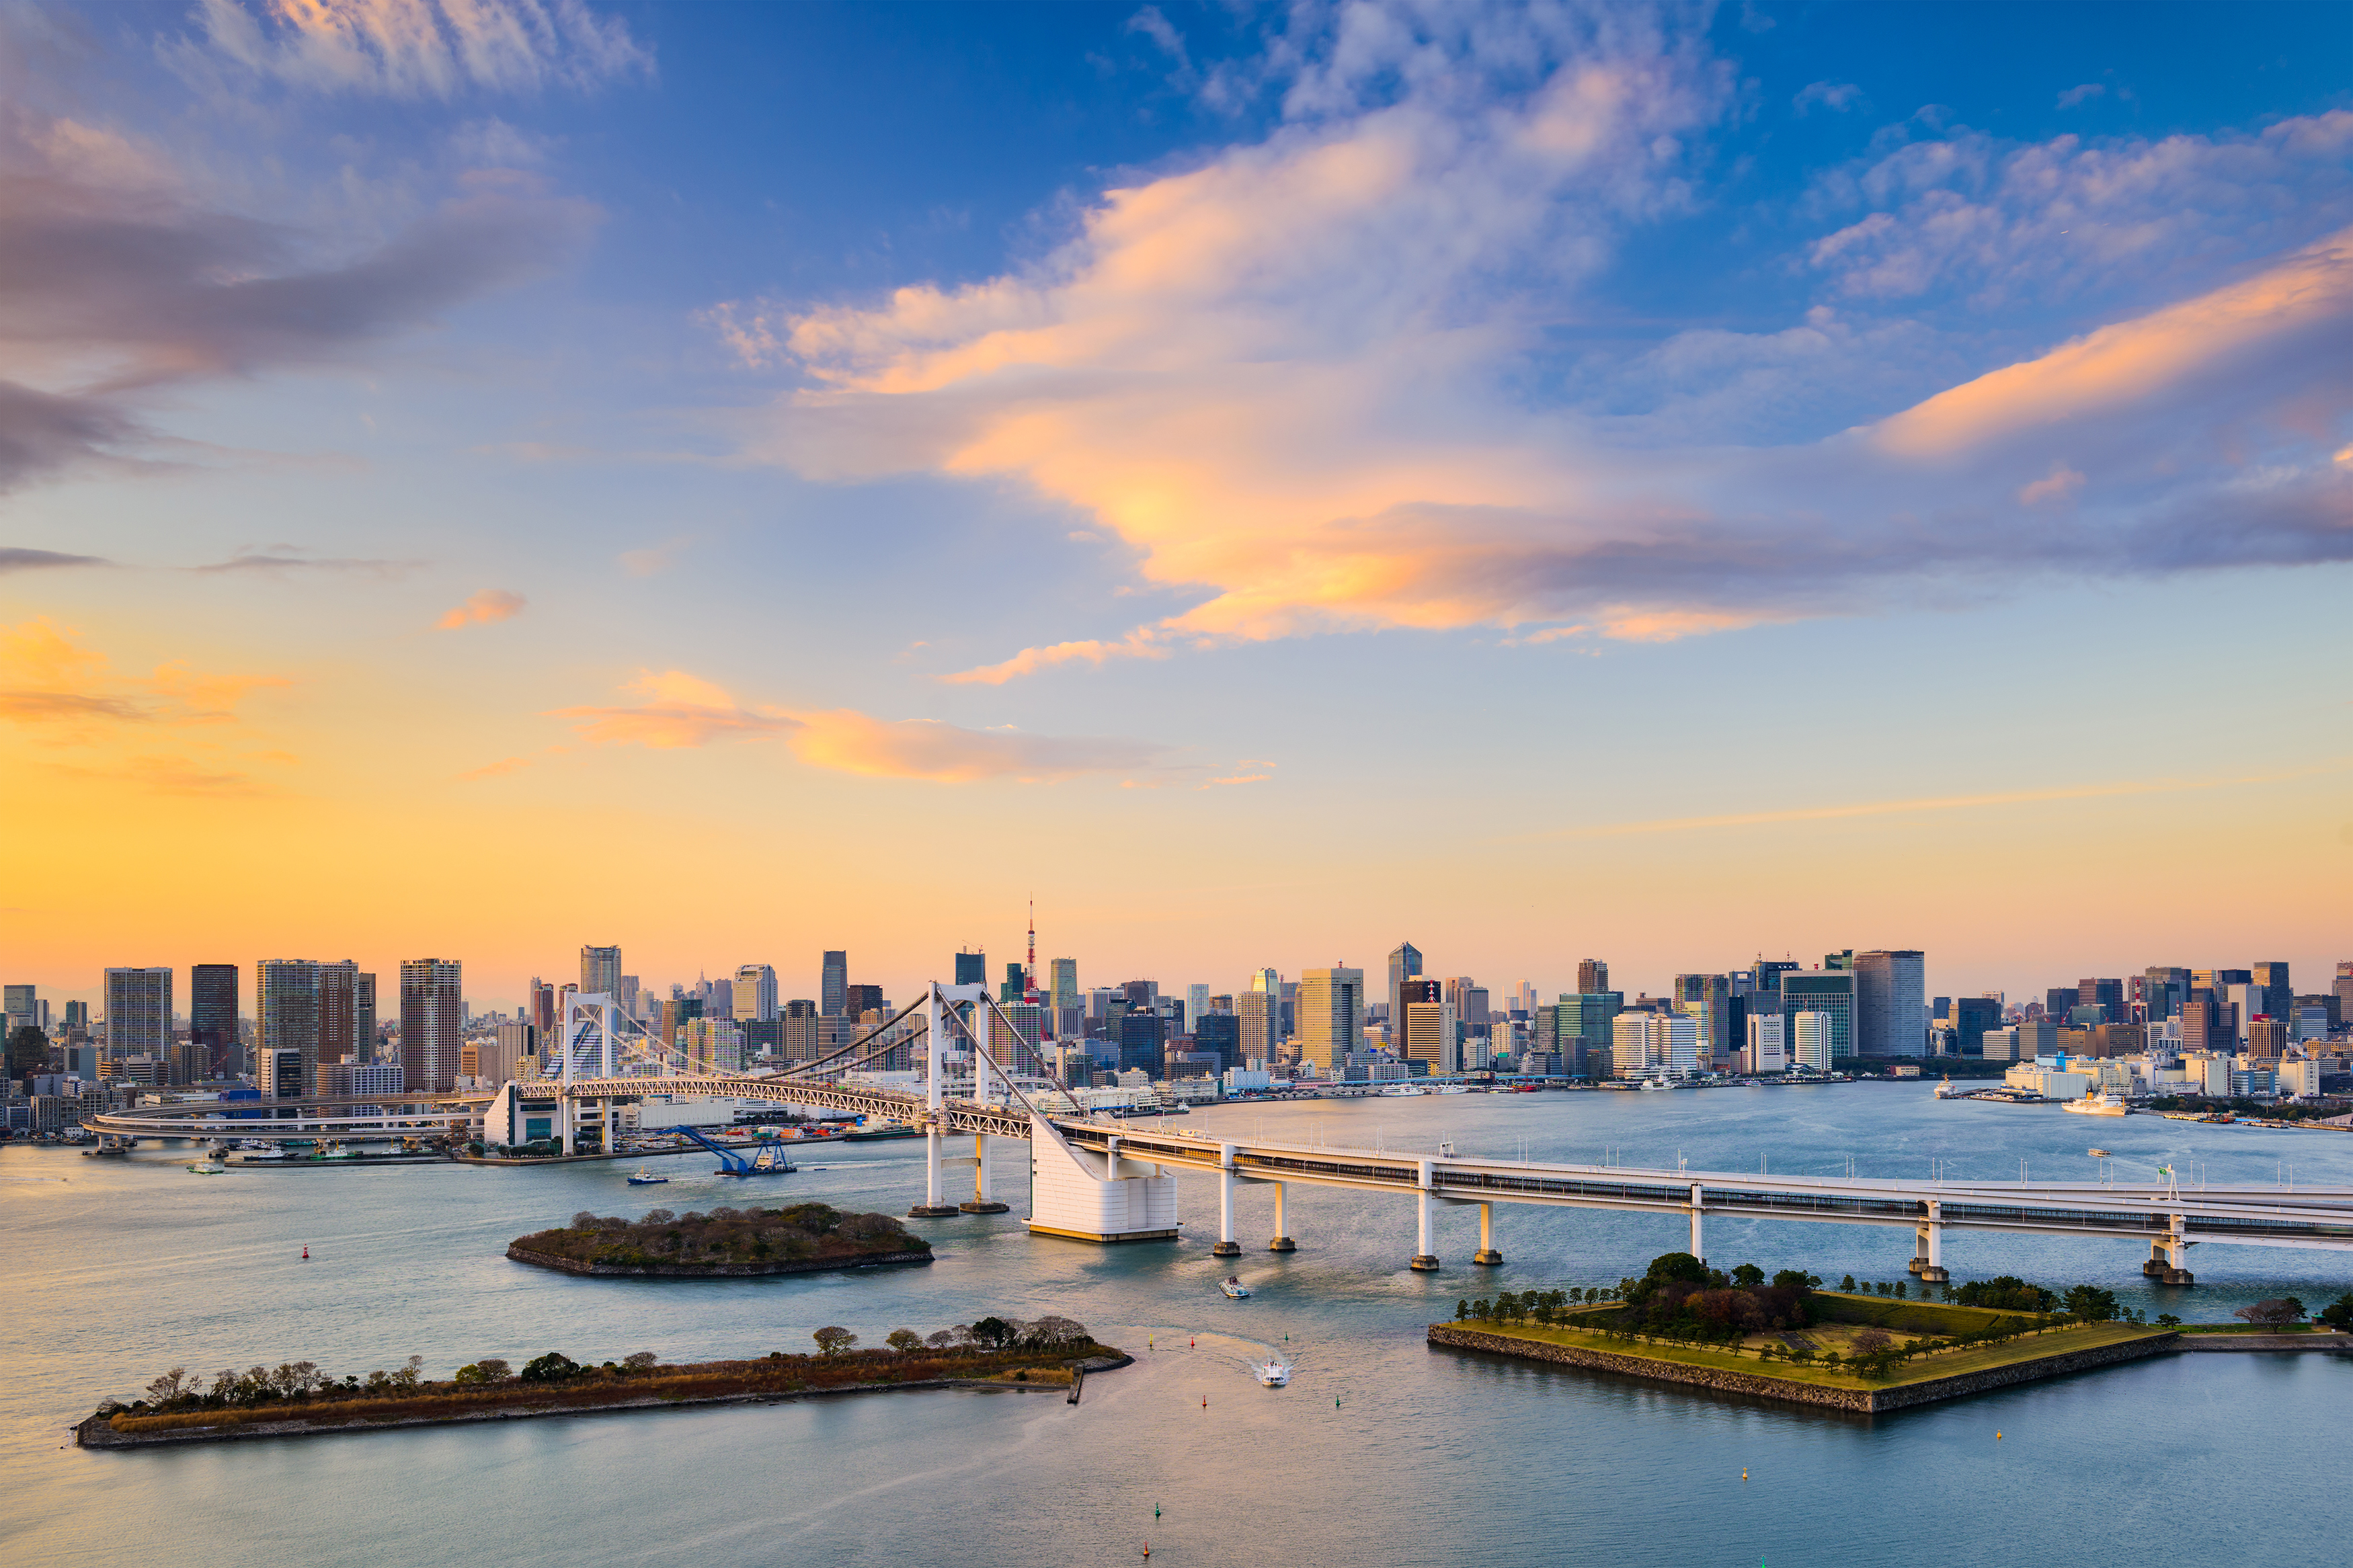 OneOcean expands presence and increases investment in Japan